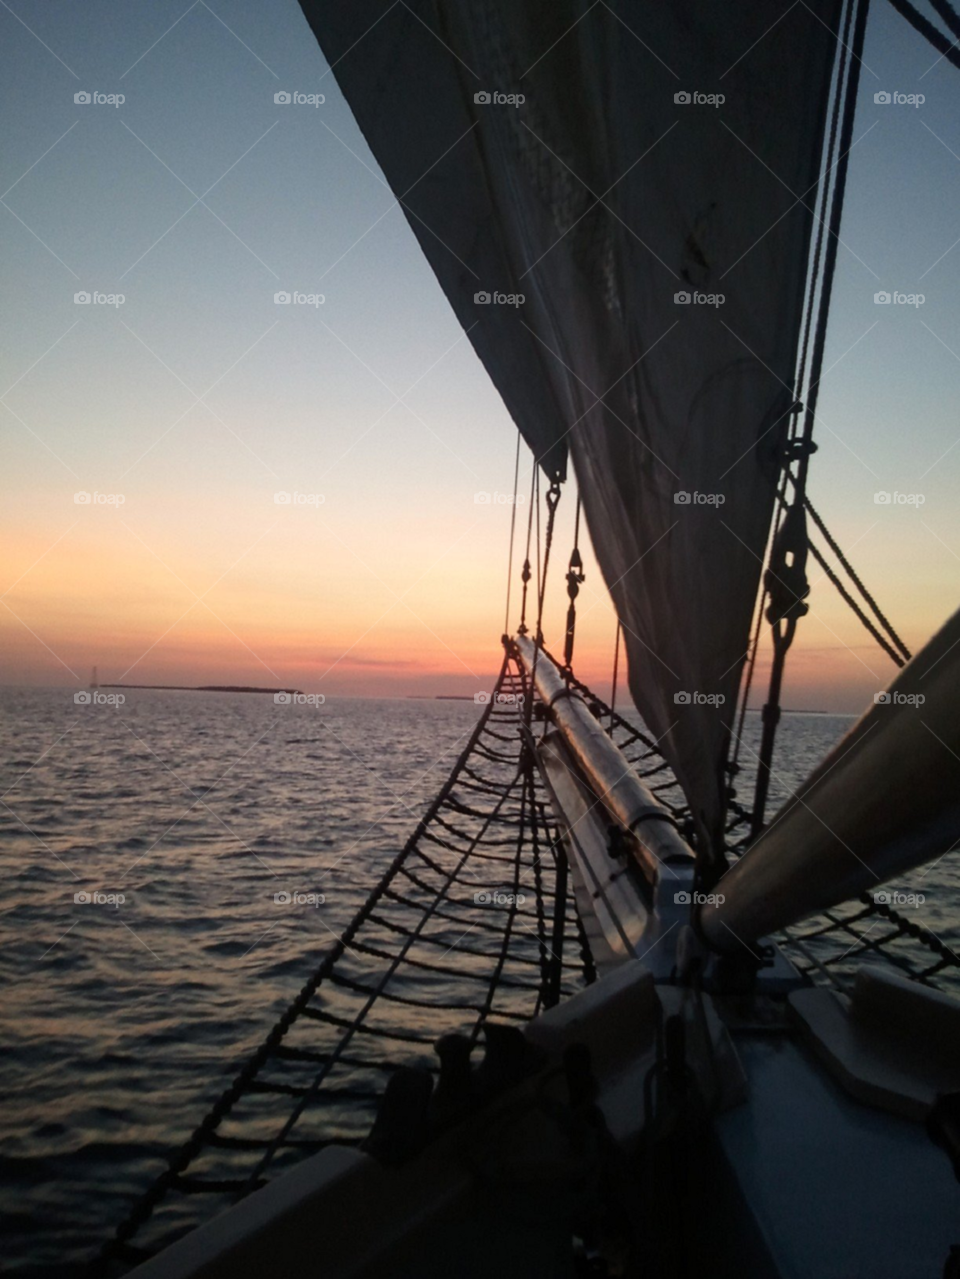 Sunset Sail. Taken aboard the Western Union tall ship in Key West, Florida. 